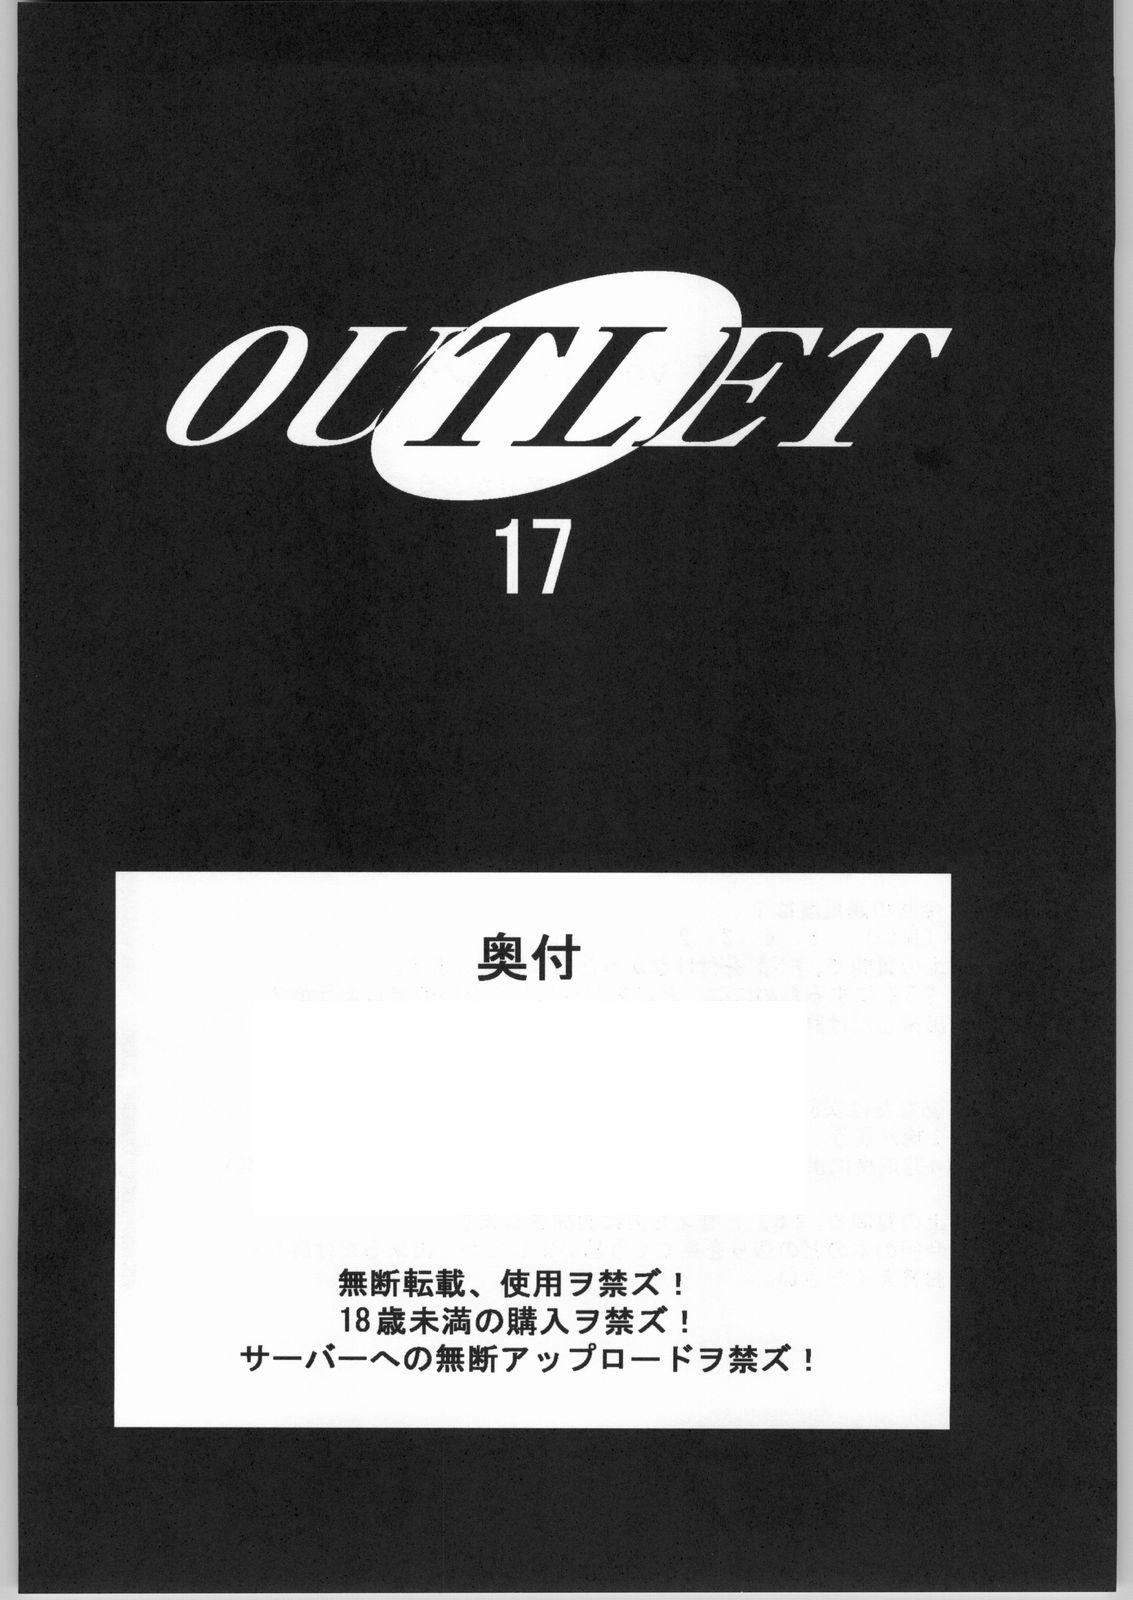 Outlet 17 48